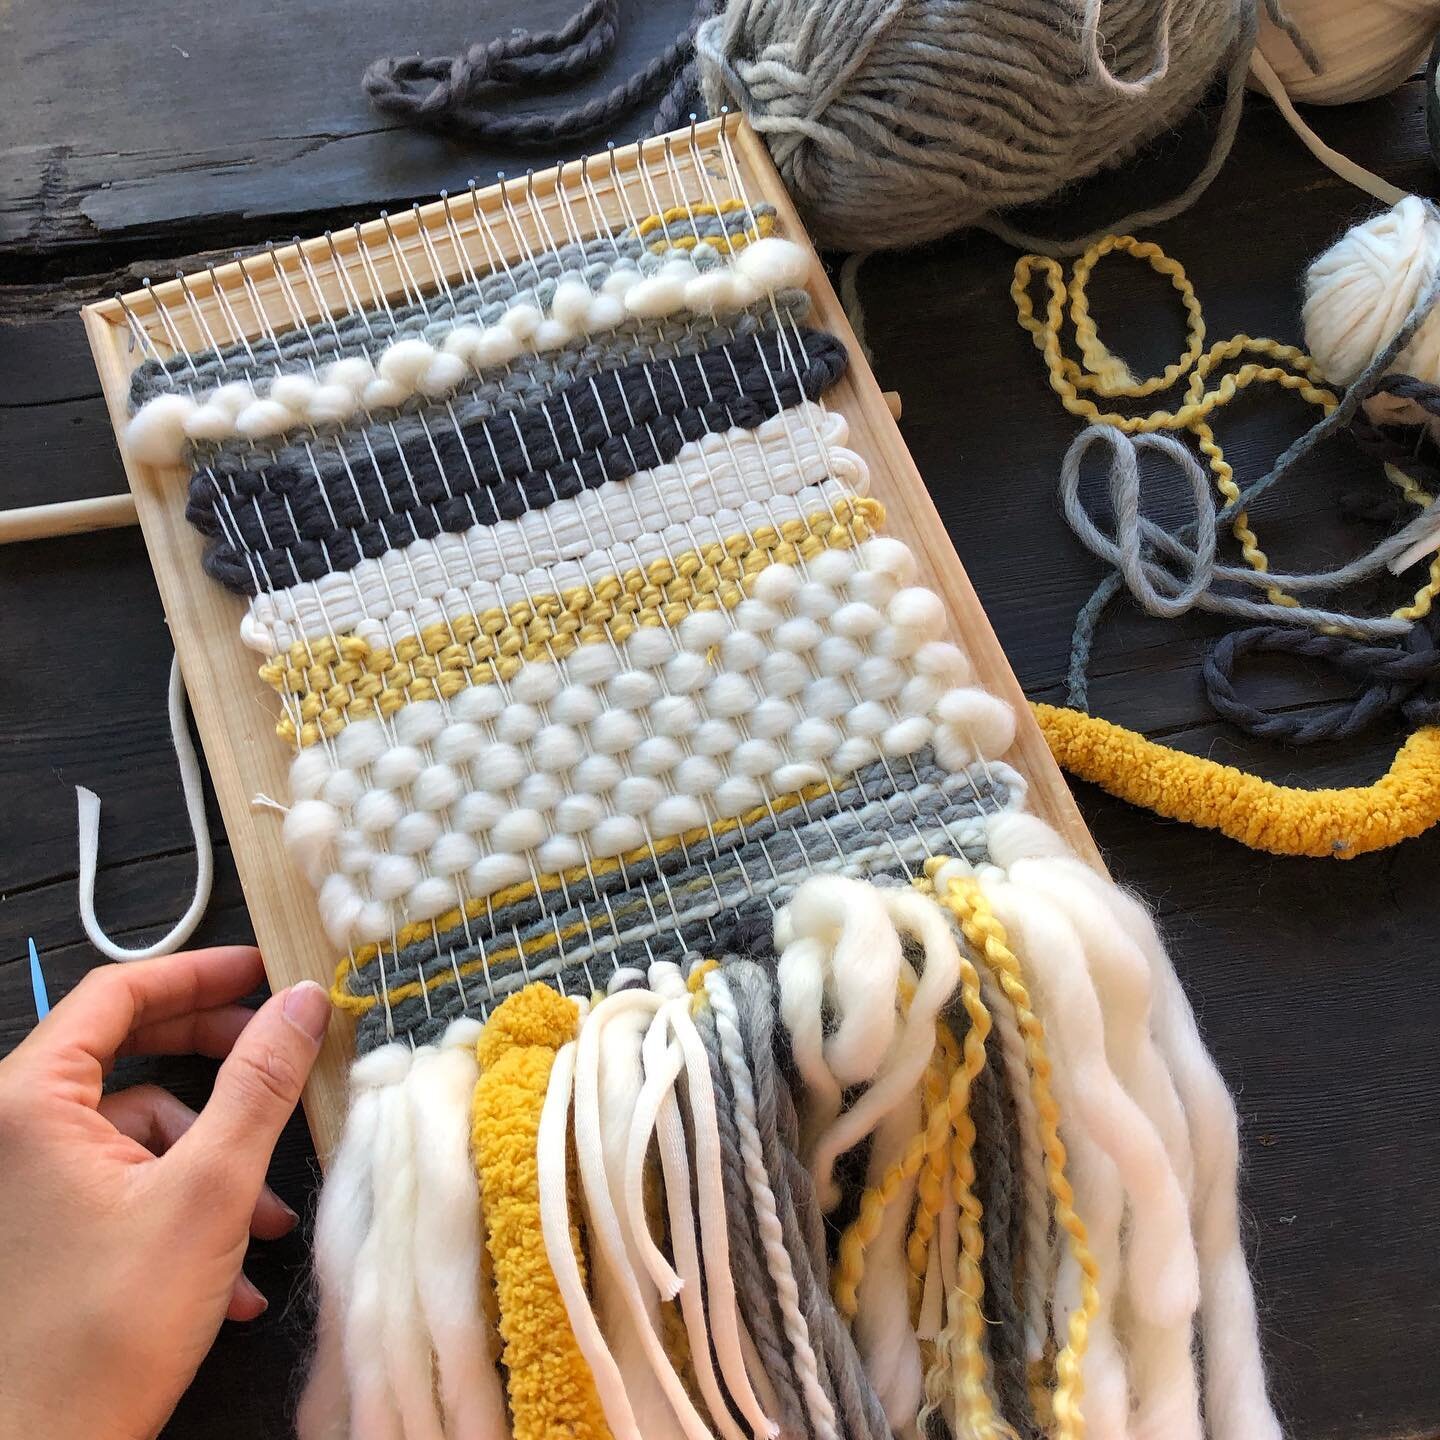 My new hobby : Looming + weaving😀
&bull;
&bull;
Another fabulous @airbnbexperiences adventure in the books! @trudyperrydesigns is a phenomenal fiber artist and teacher who made me feel comfortable and confident from the start. I was most surprised a